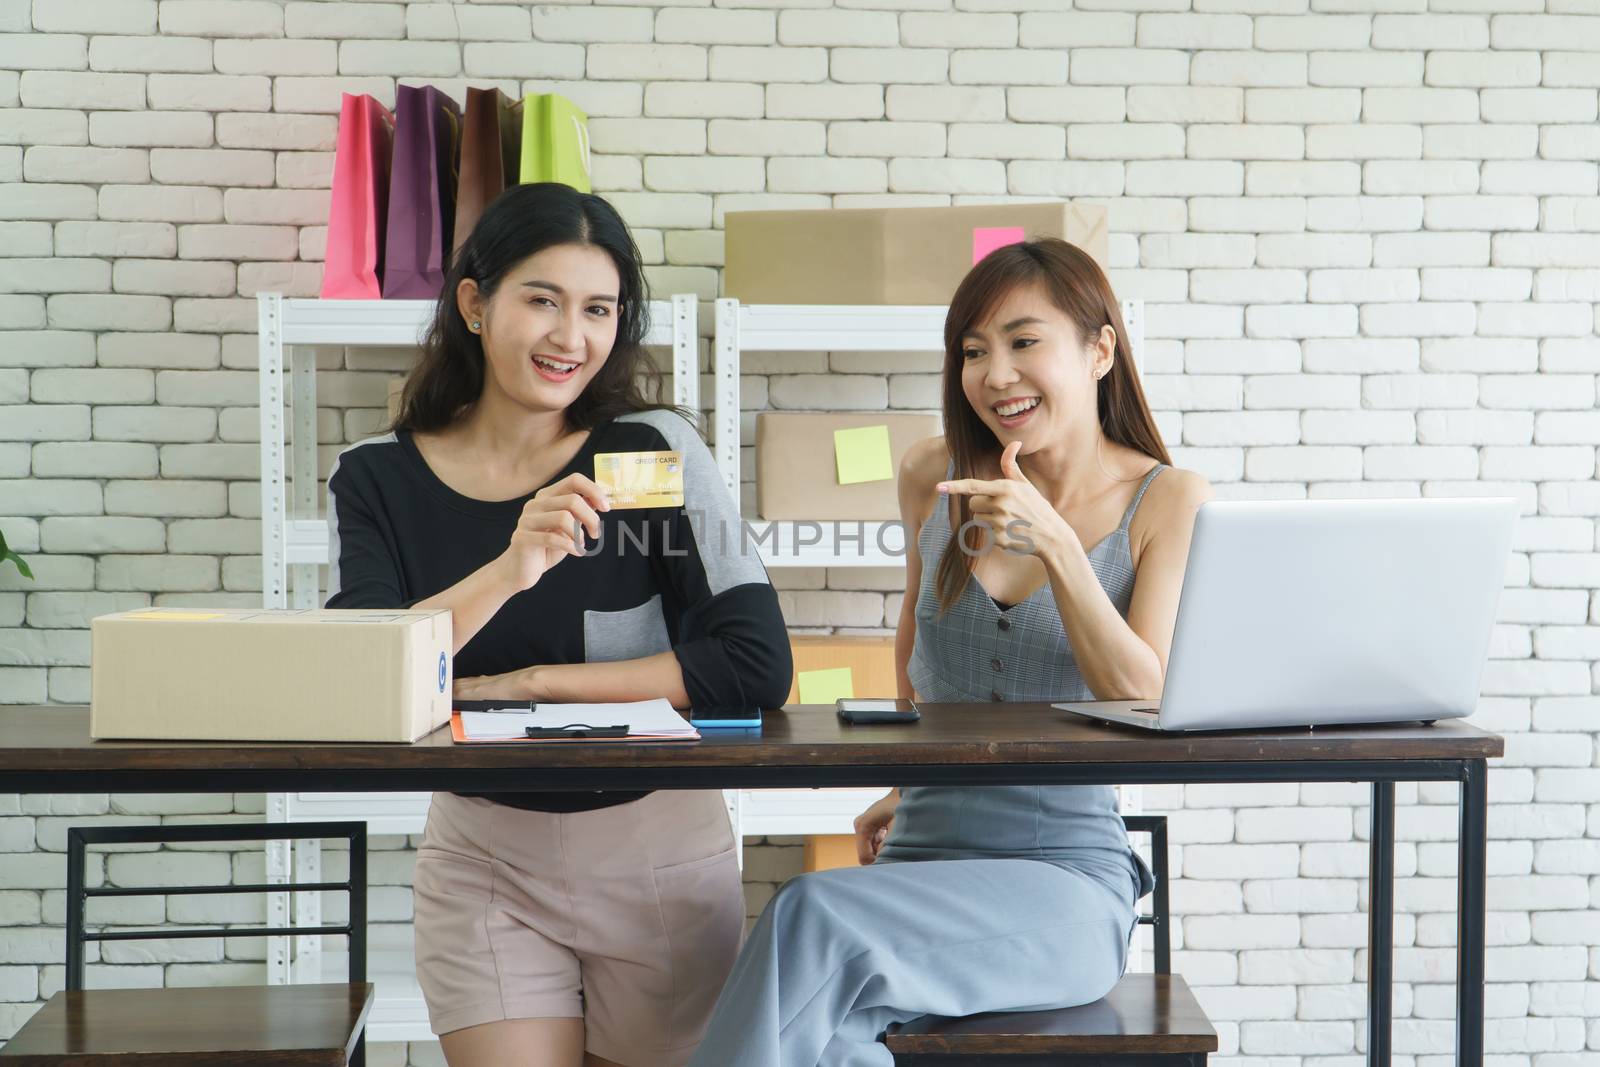 Entrepreneurs the online sales business, attractive Asian women holding a credit card, are checking orders from customers from the computer. Merchant business owner Small  marketing using technology